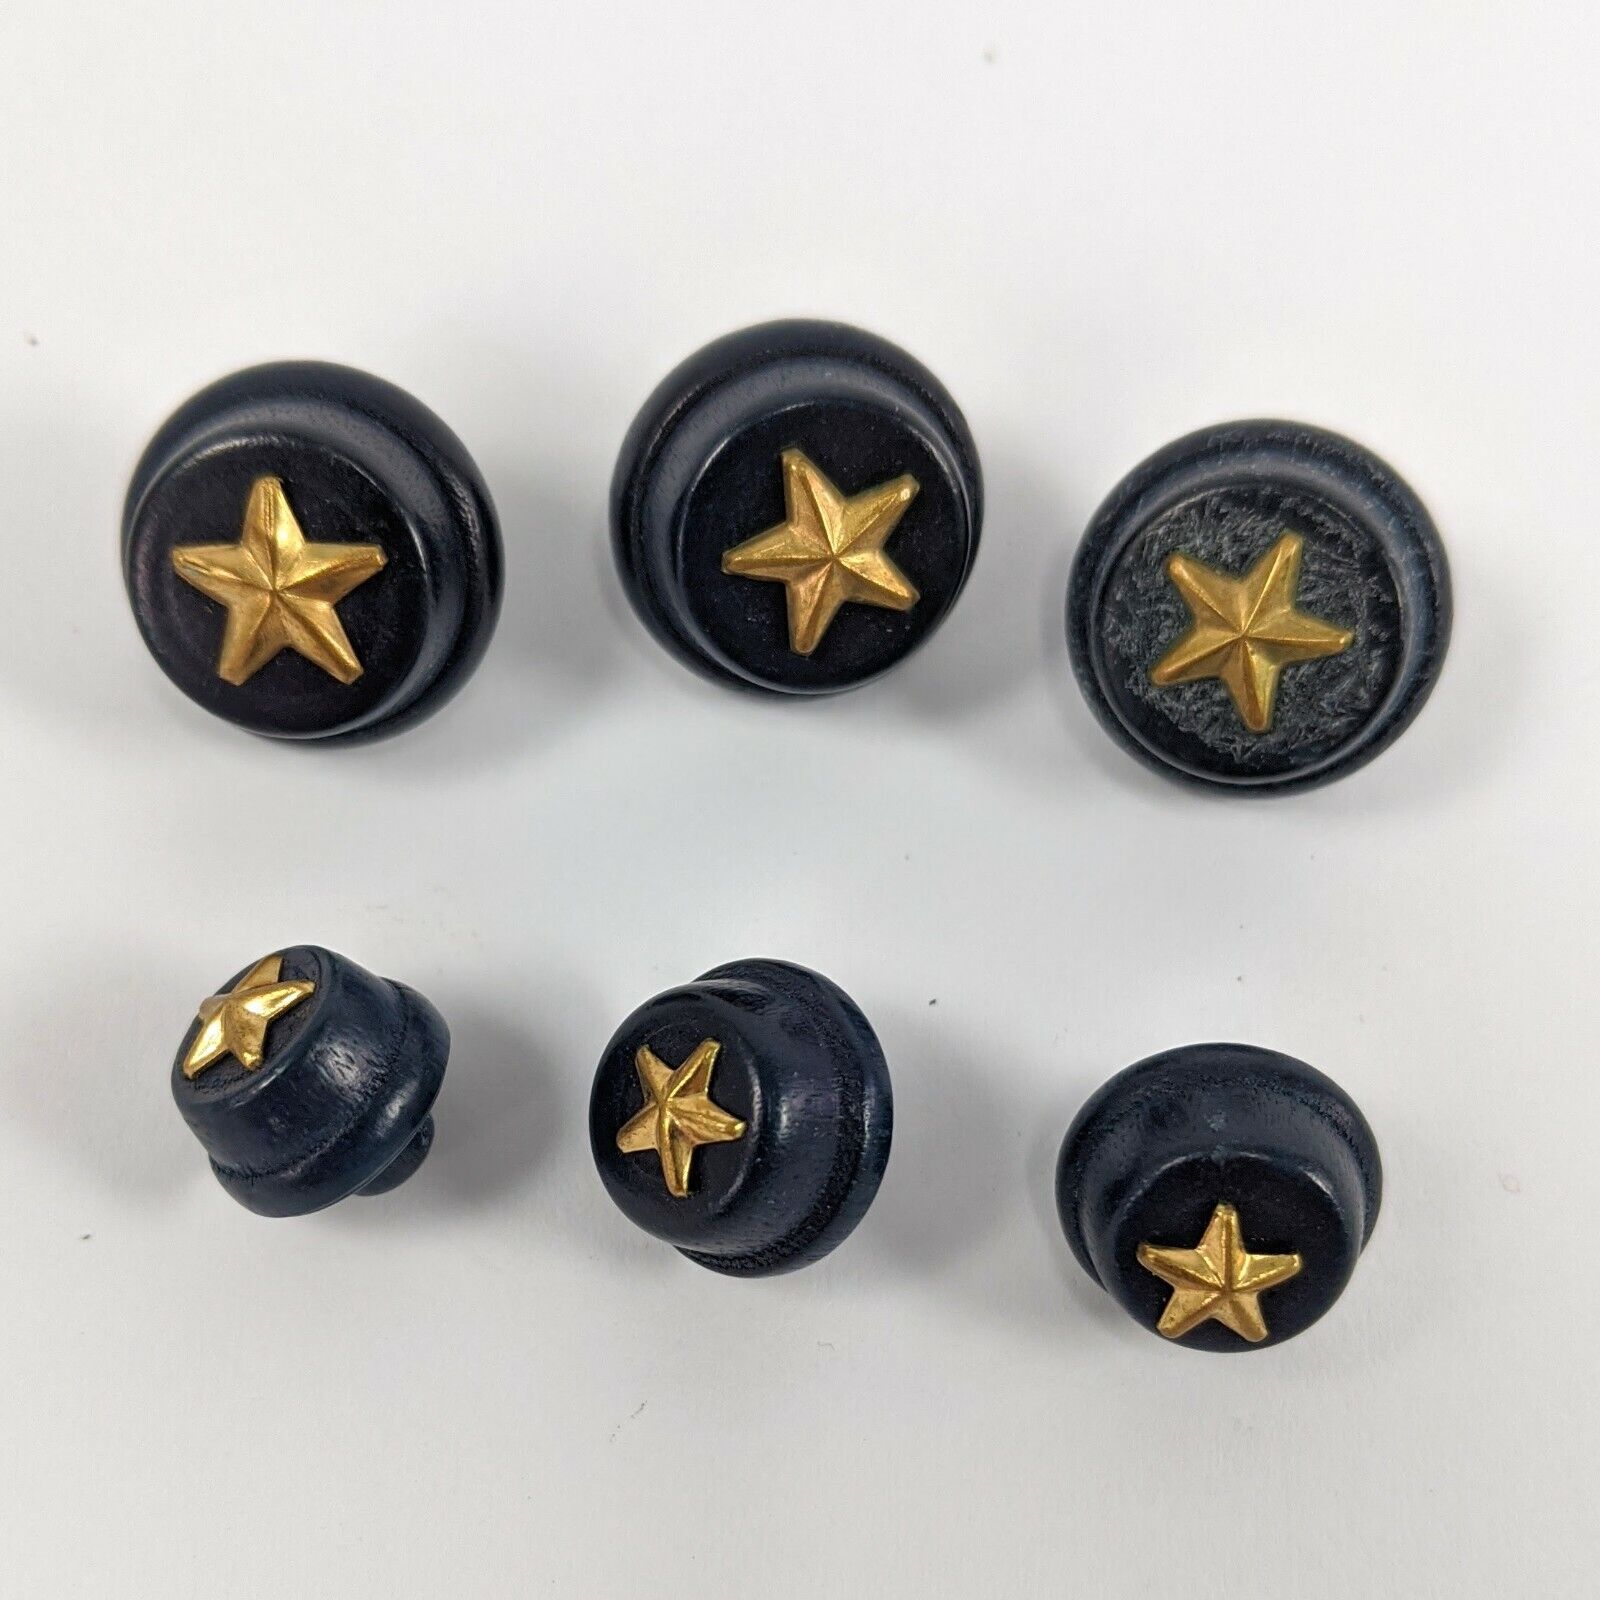 Vintage Navy Blue Gold Star Uniform Buttons Military Buttons Lot of 6 Bakelite